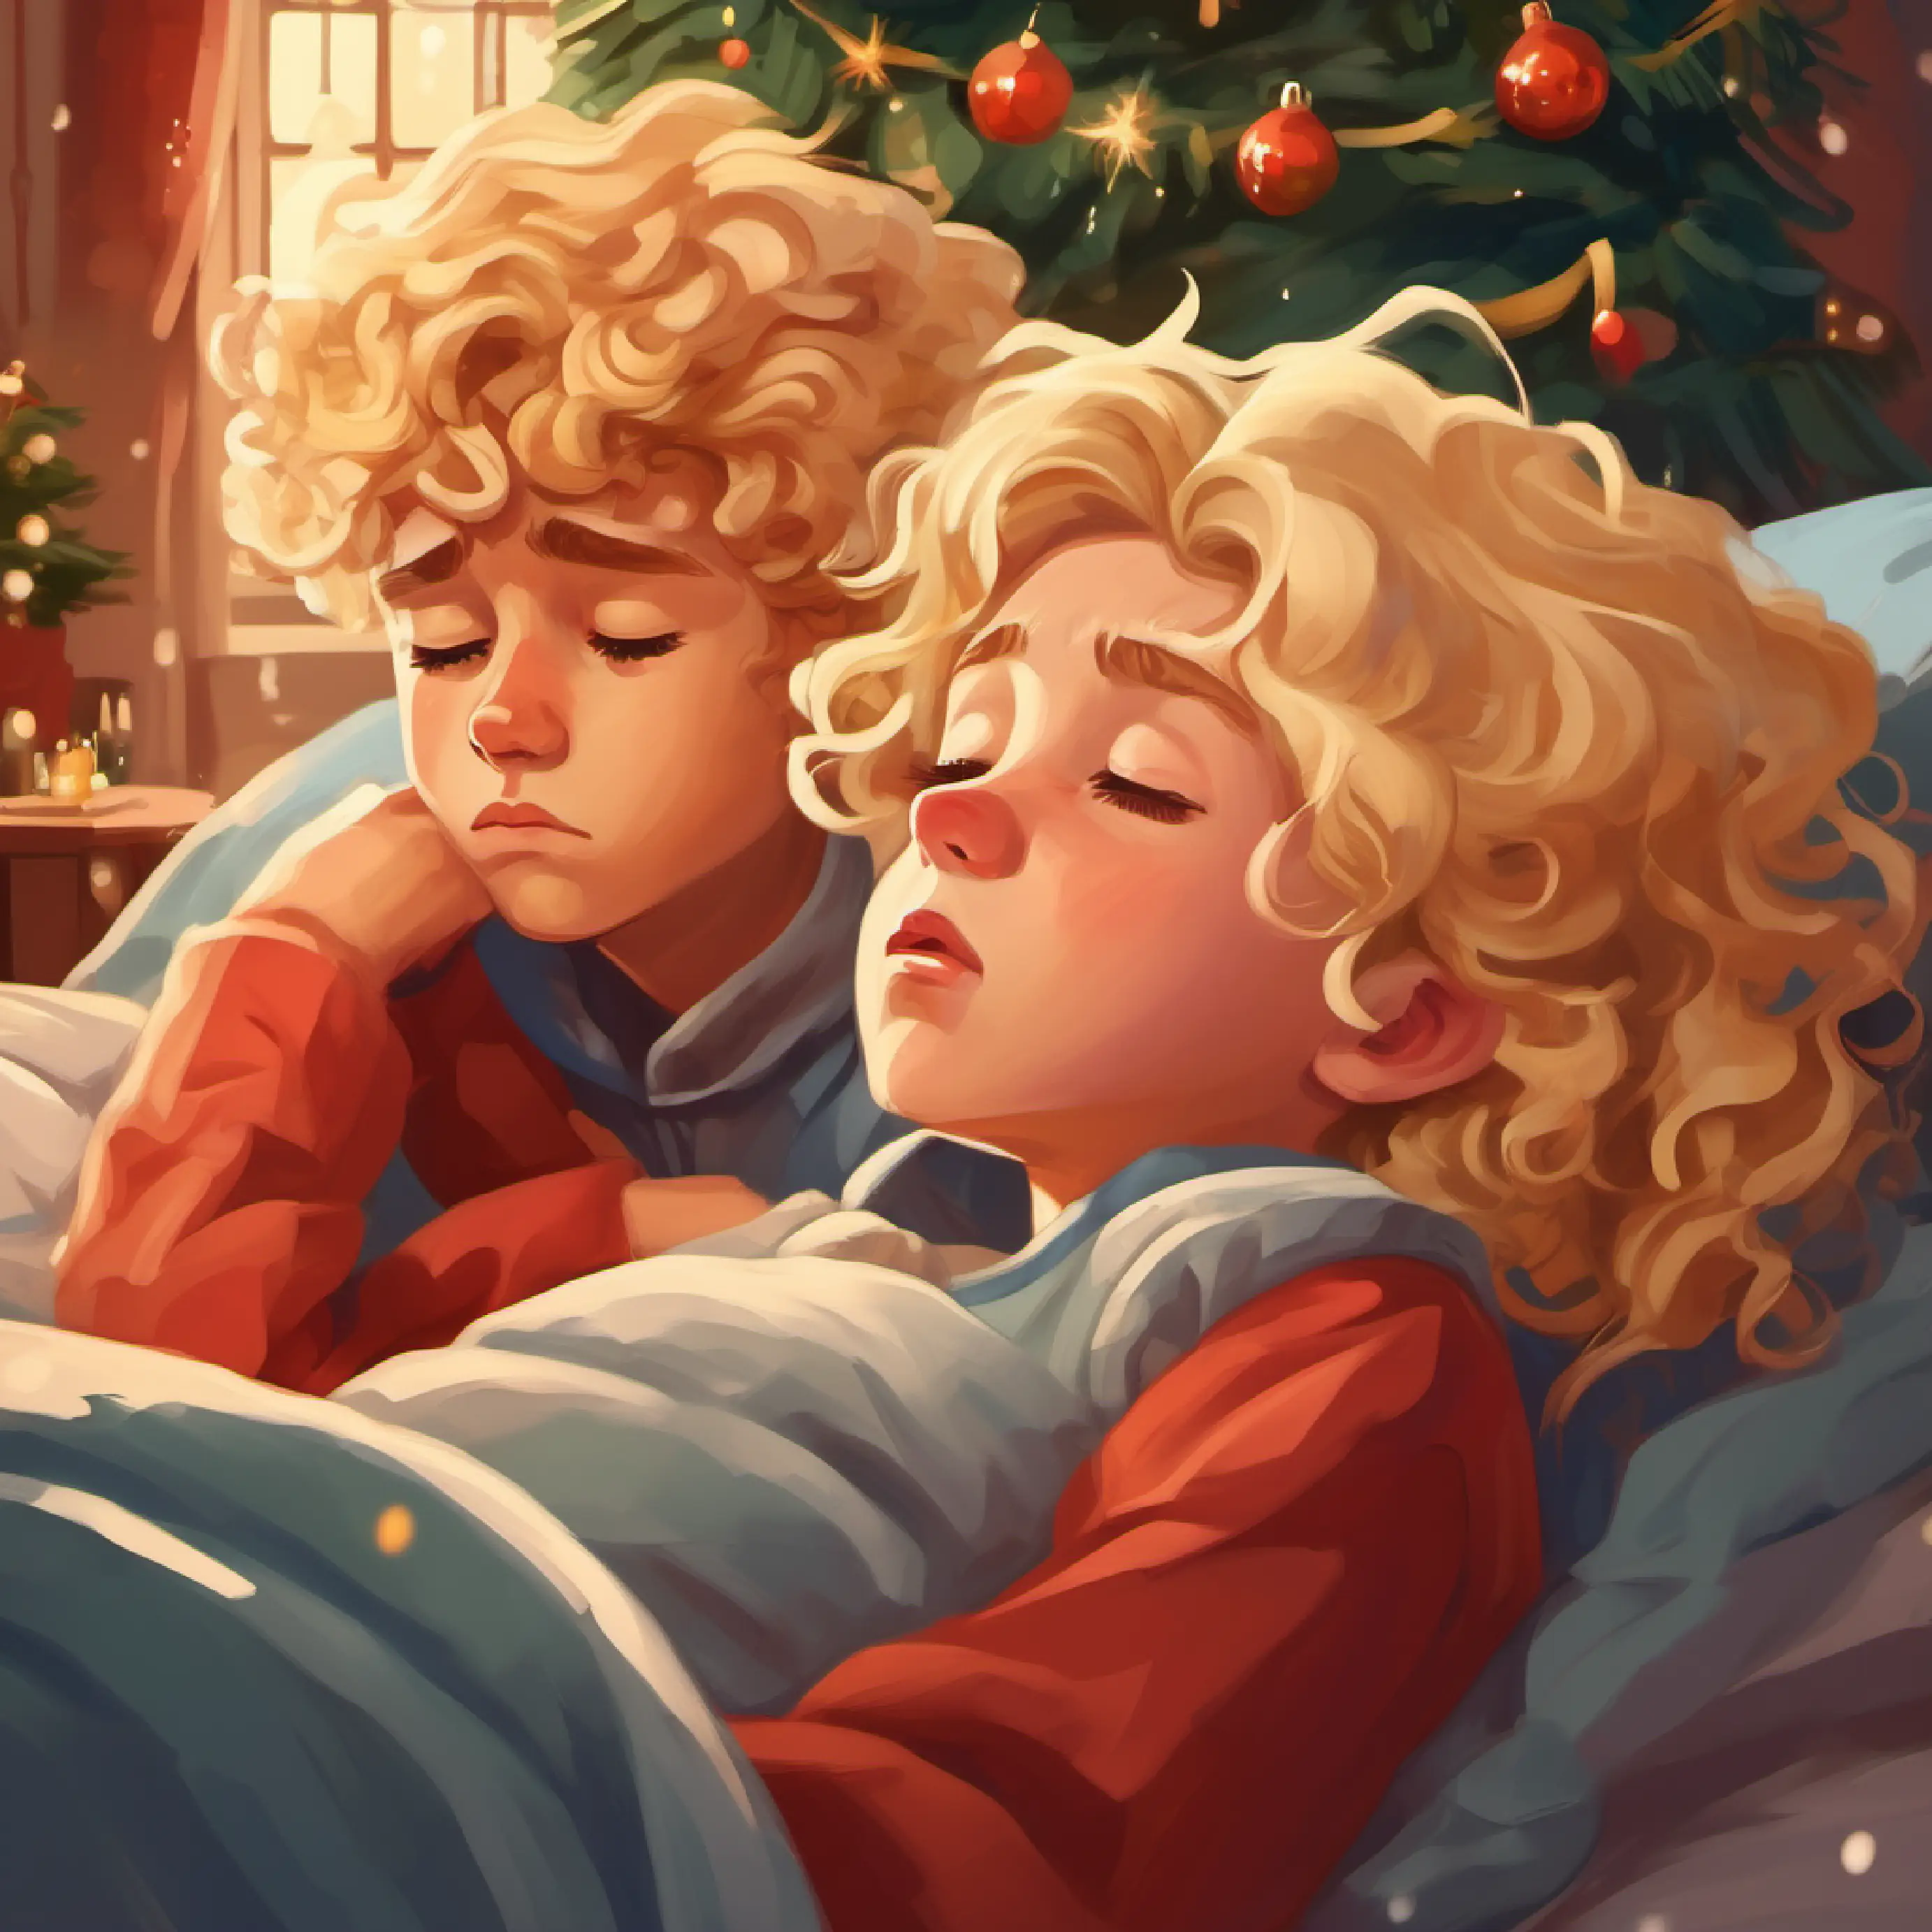 boy with curly blonde hair crying very sad and girl with curly blonde hair asleep in bed